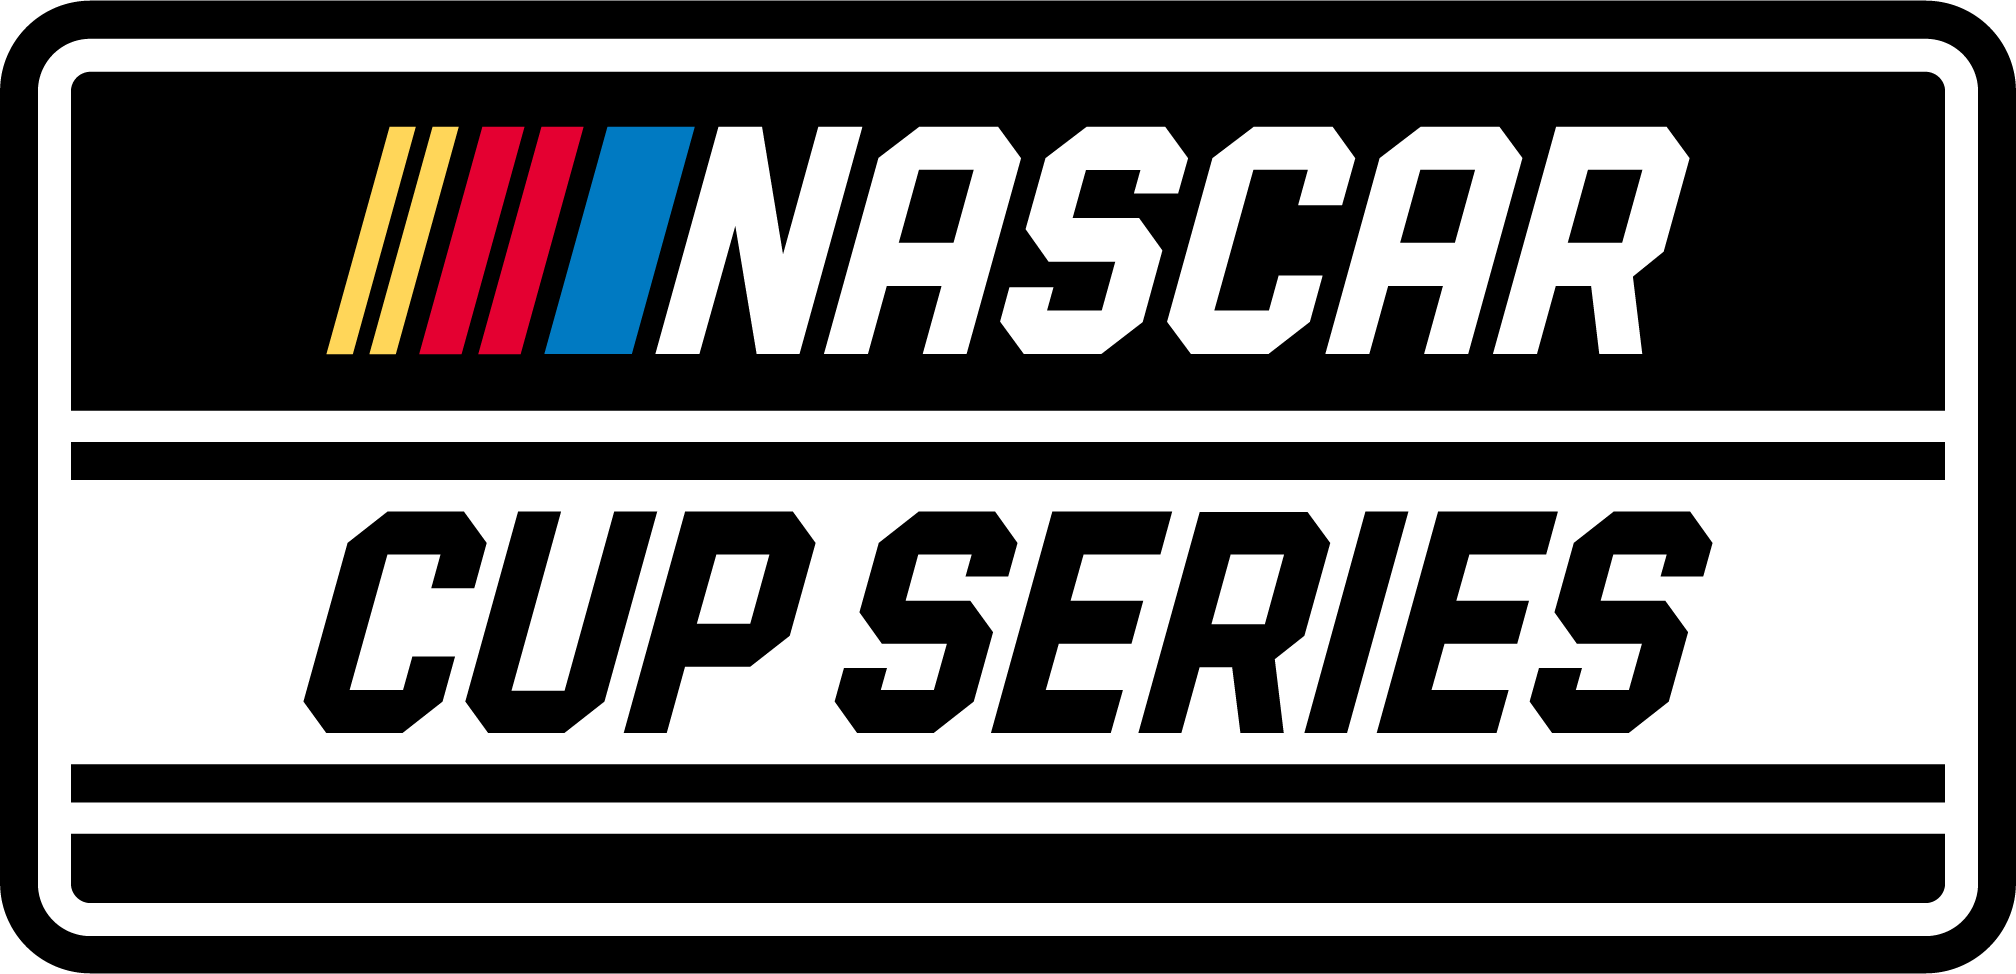 NASCAR Monster Cup Series